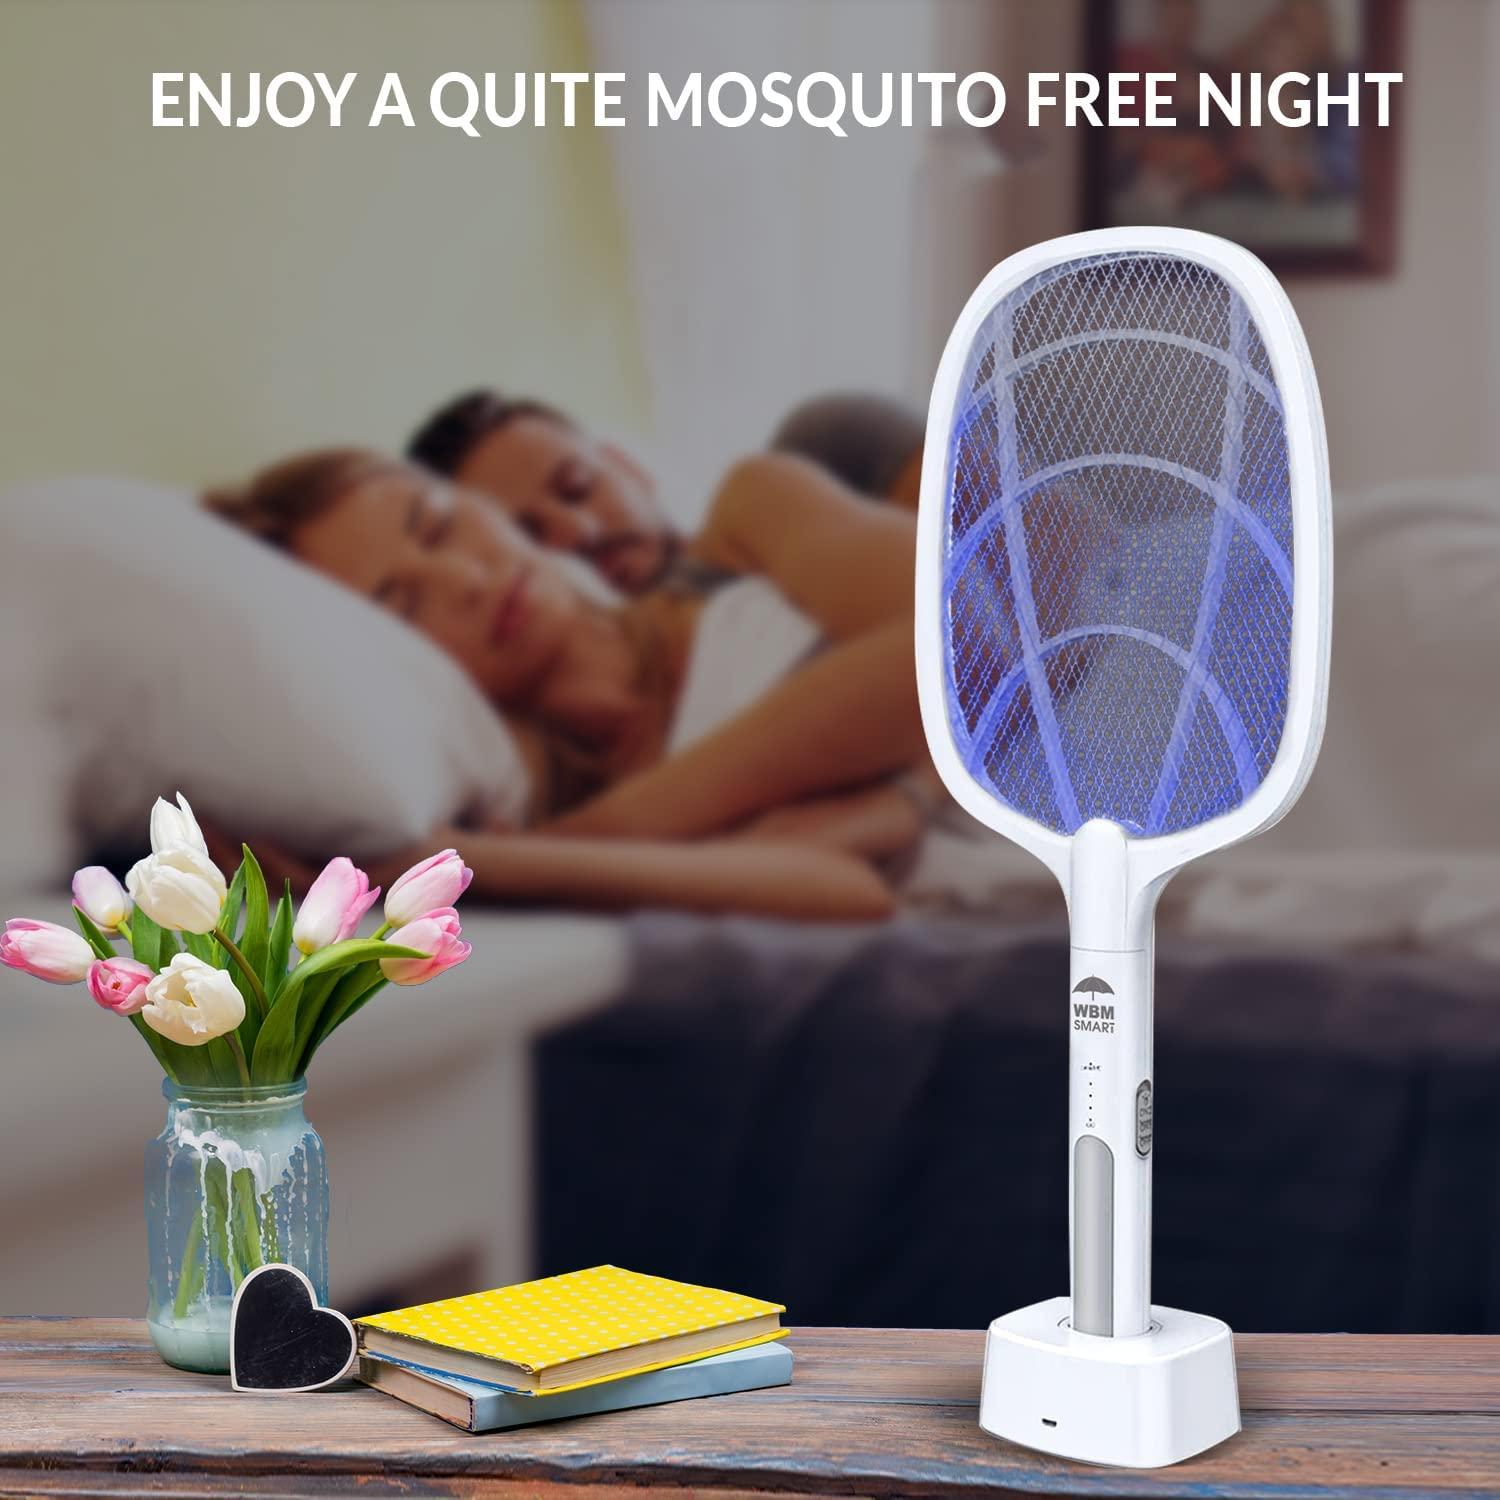 WBM SMART 7 in. White 2-in-1 Rechargeable Bug Zapper, Mosquito